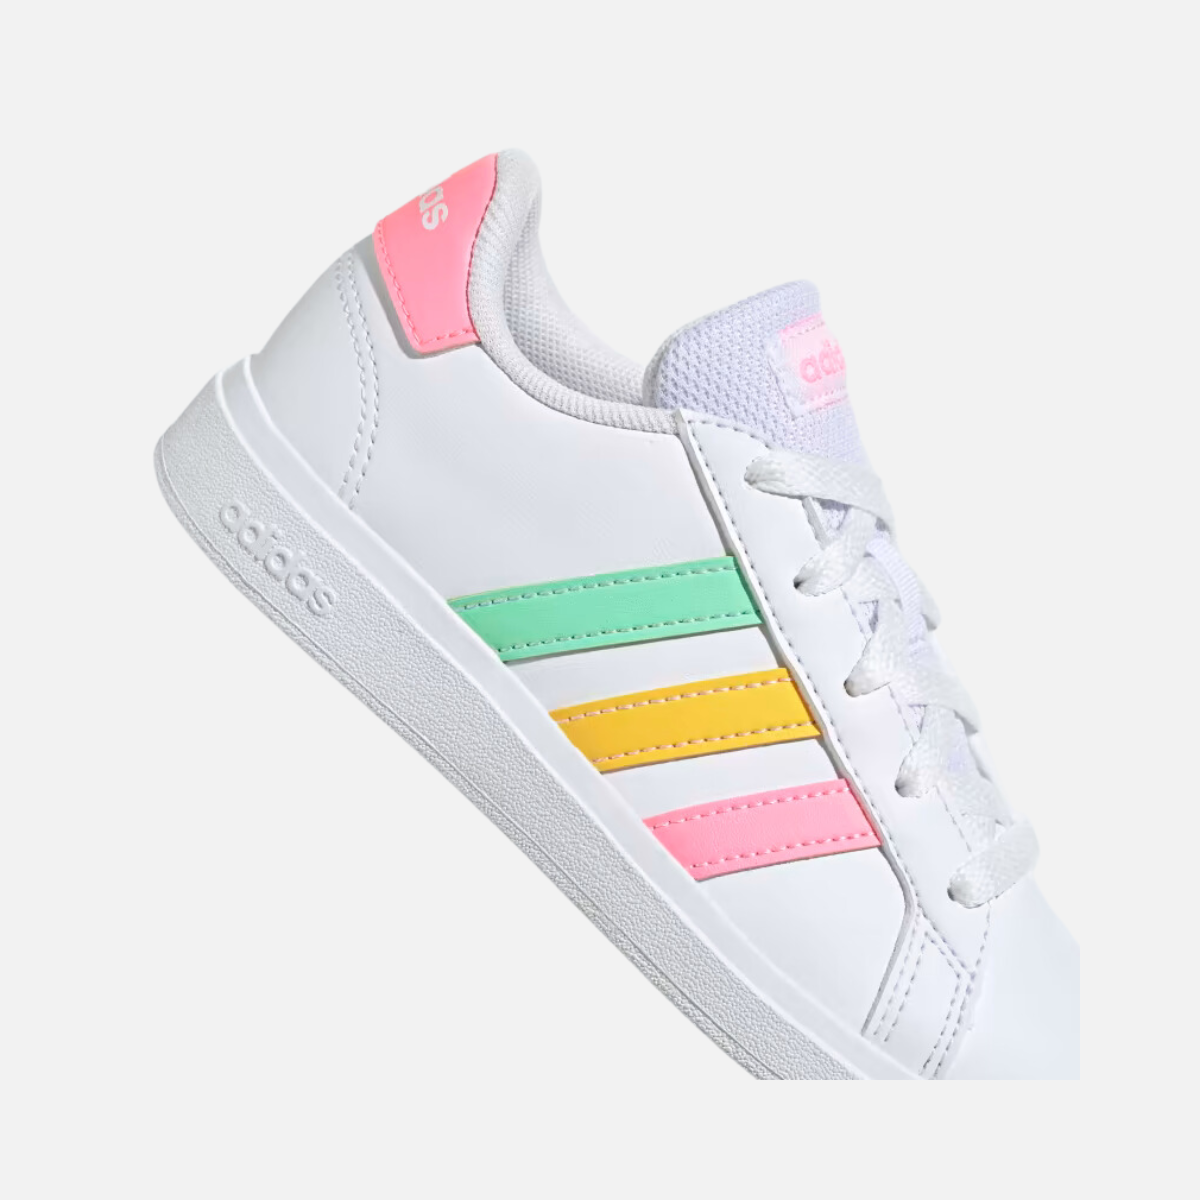 Adidas Essentials GRAND COURT 2.0 Kids Unisex Shoes BOY AND GIRL (8-16 YEAR) -Cloud White/Pulse Mint/Beam Pink